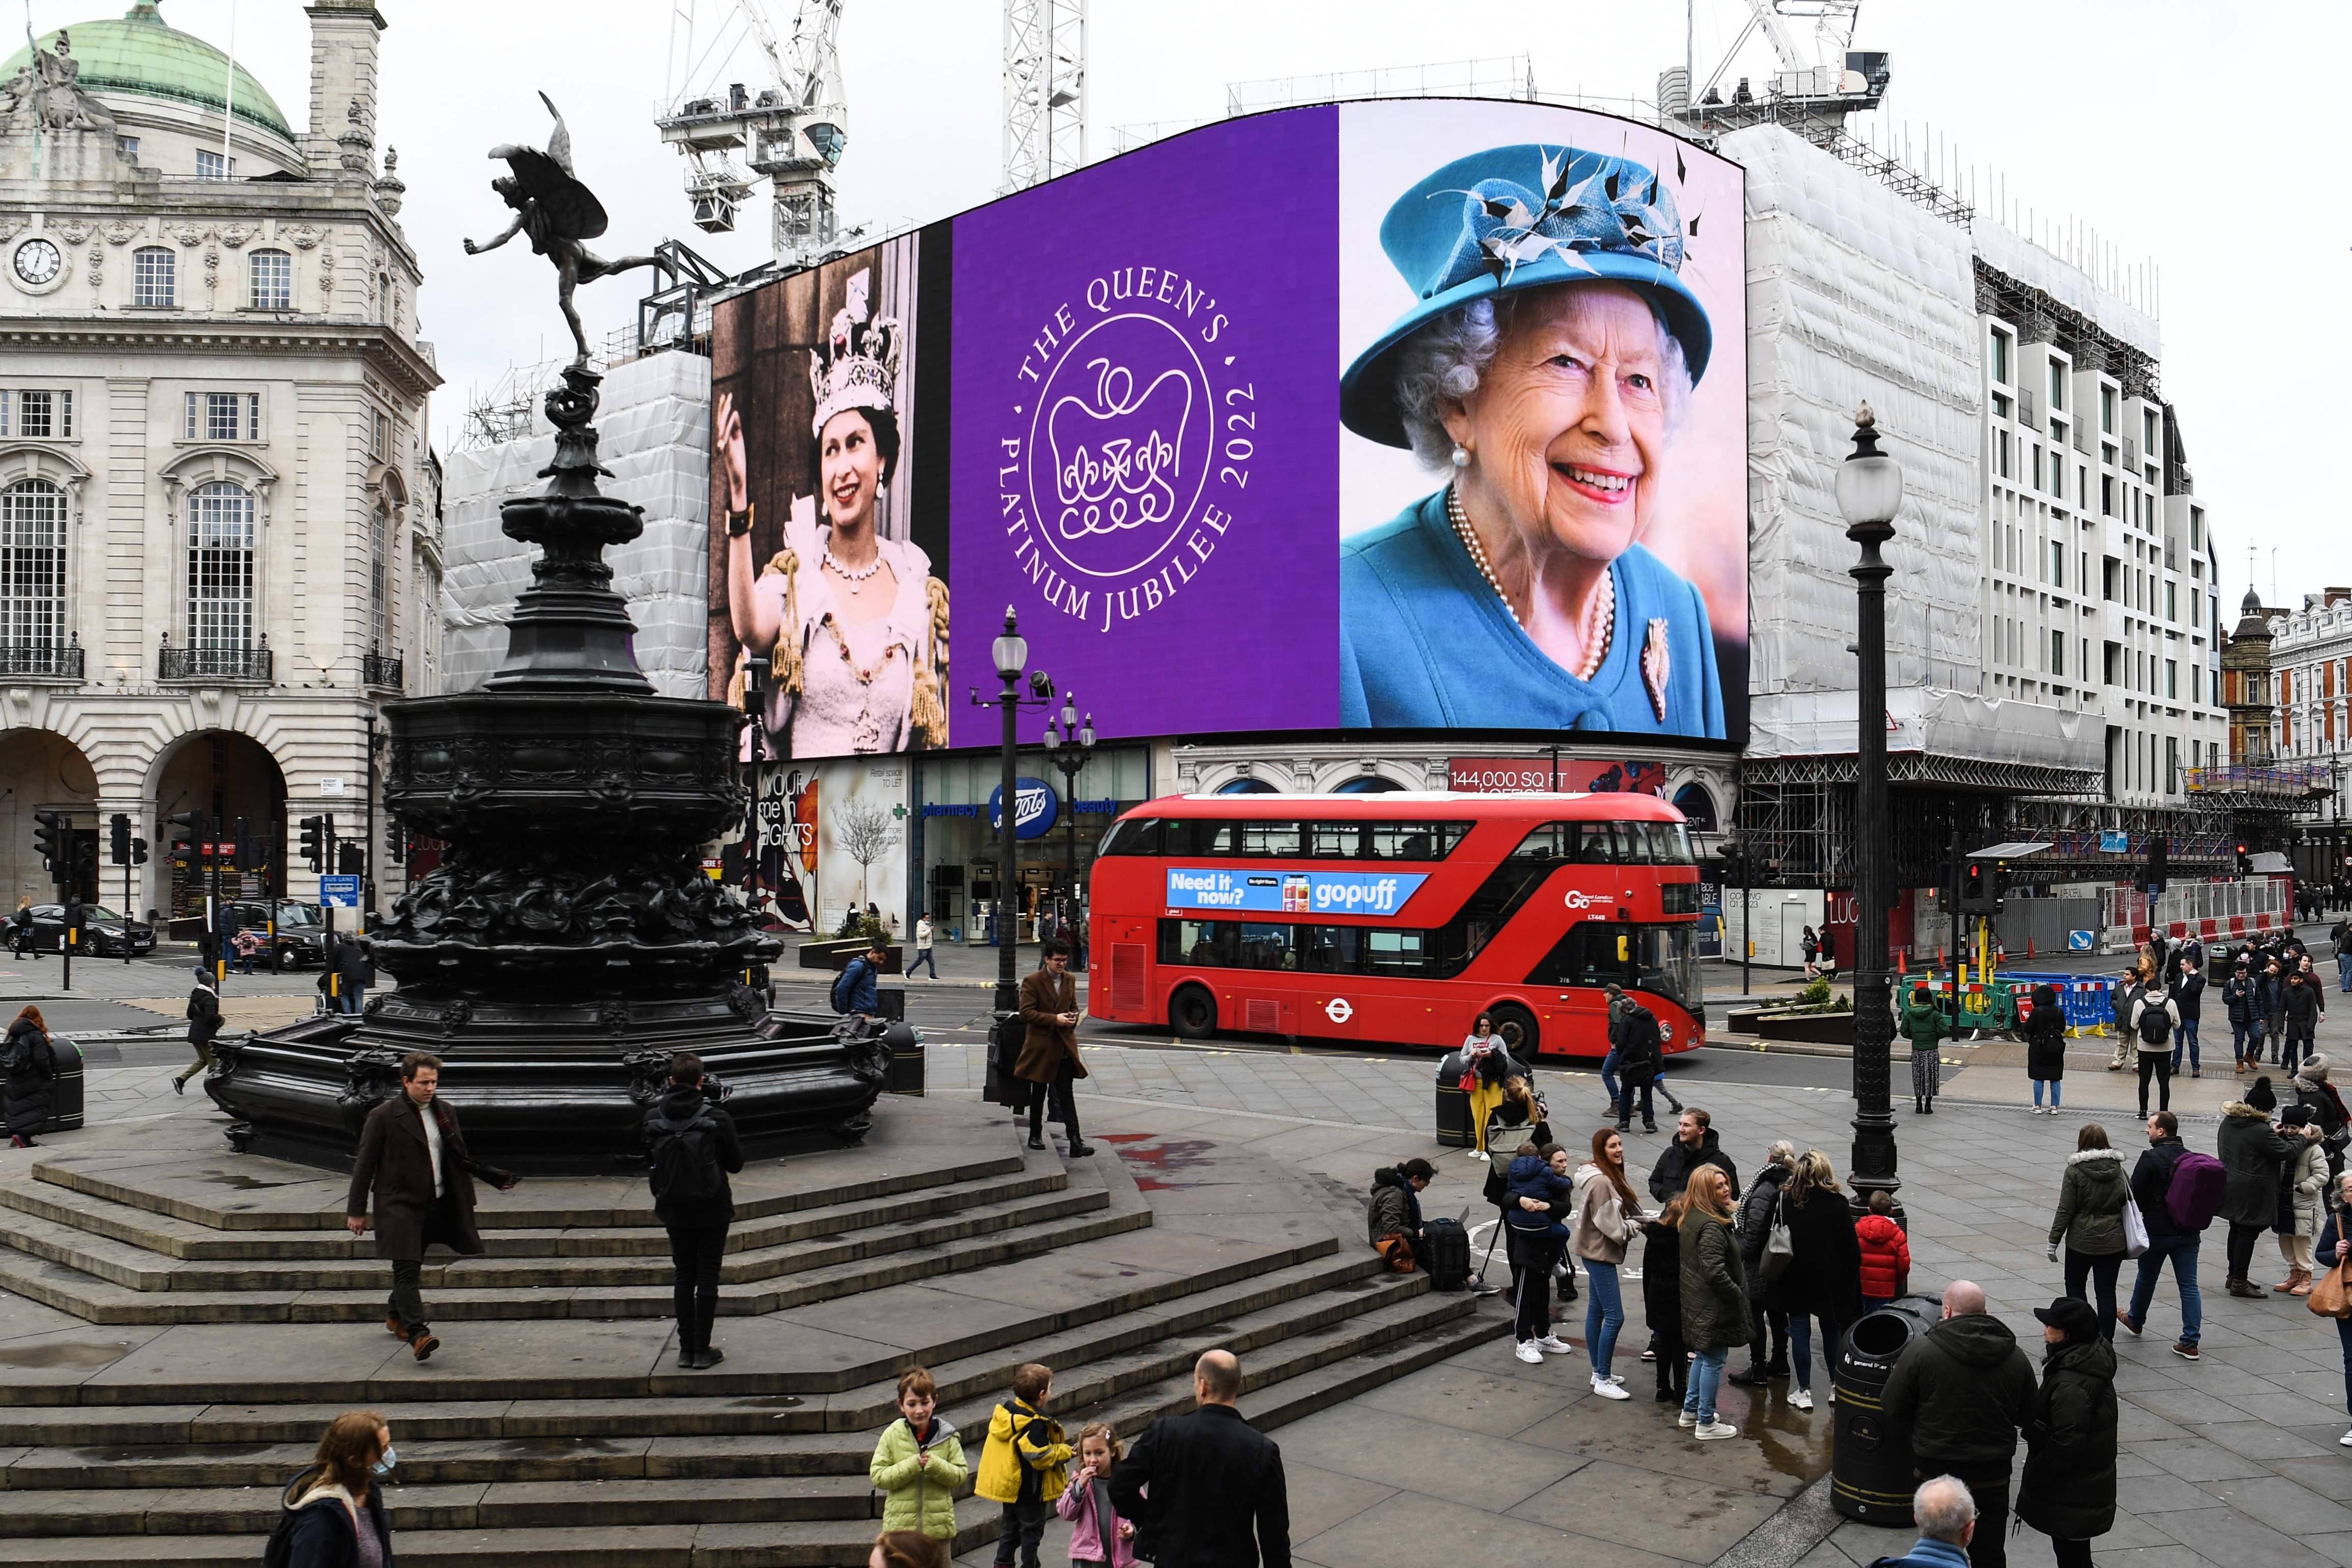 Images of Queen Elizabeth II are displayed in Piccadilly Circus, London, on 6 February 2022 to mark the start of her platinum jubilee year.